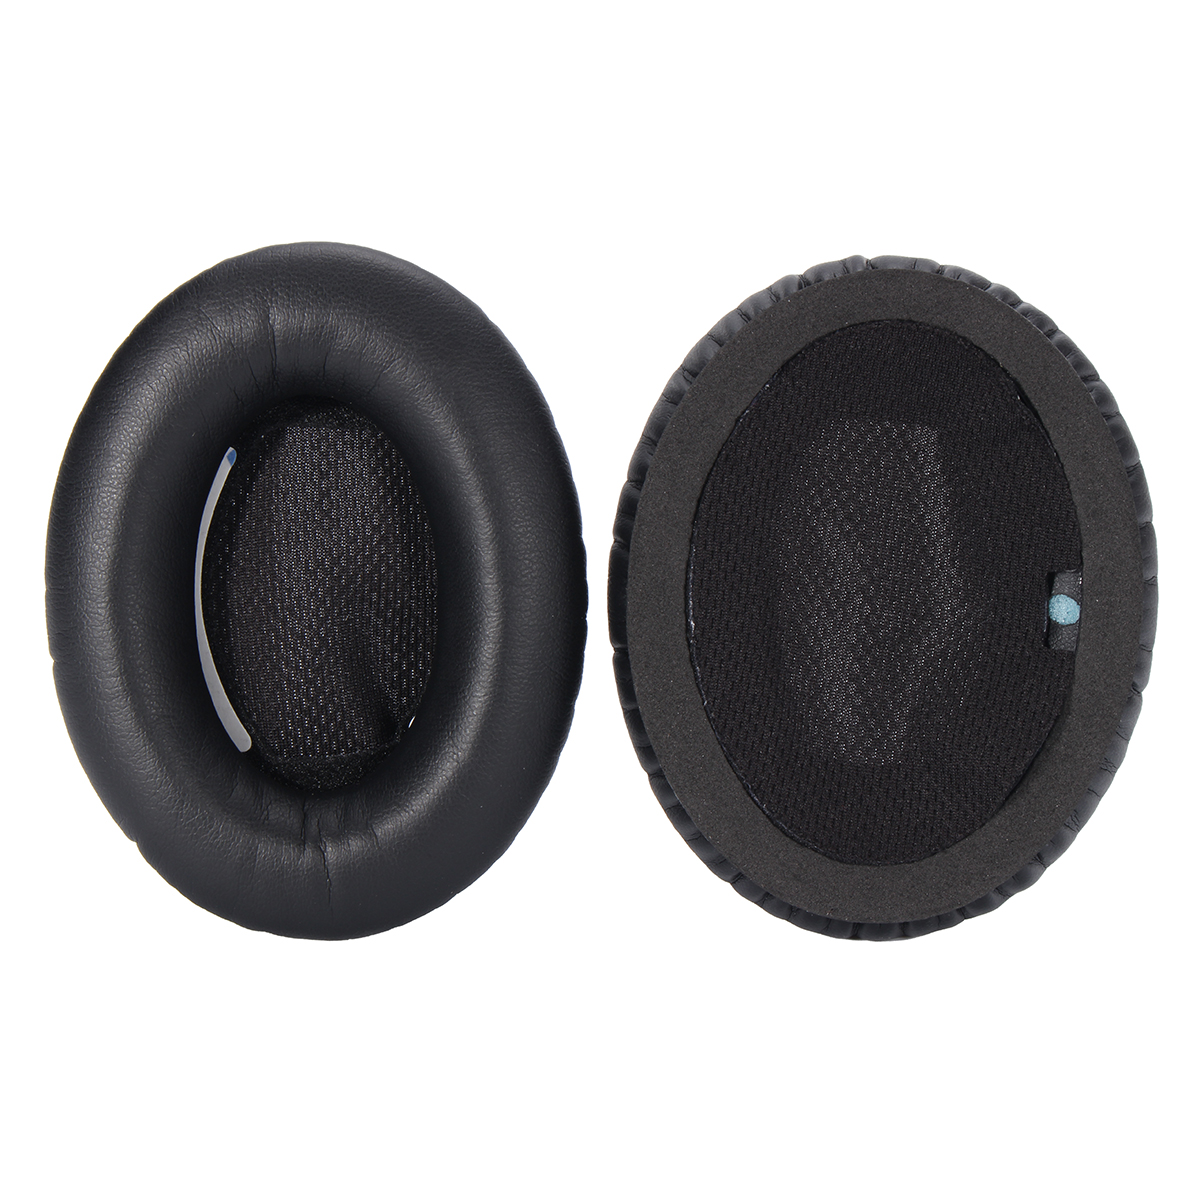 

Replacement Ear Pads Cushion SoundTrue Around Headphone for Triport TP1 AE1 Headset